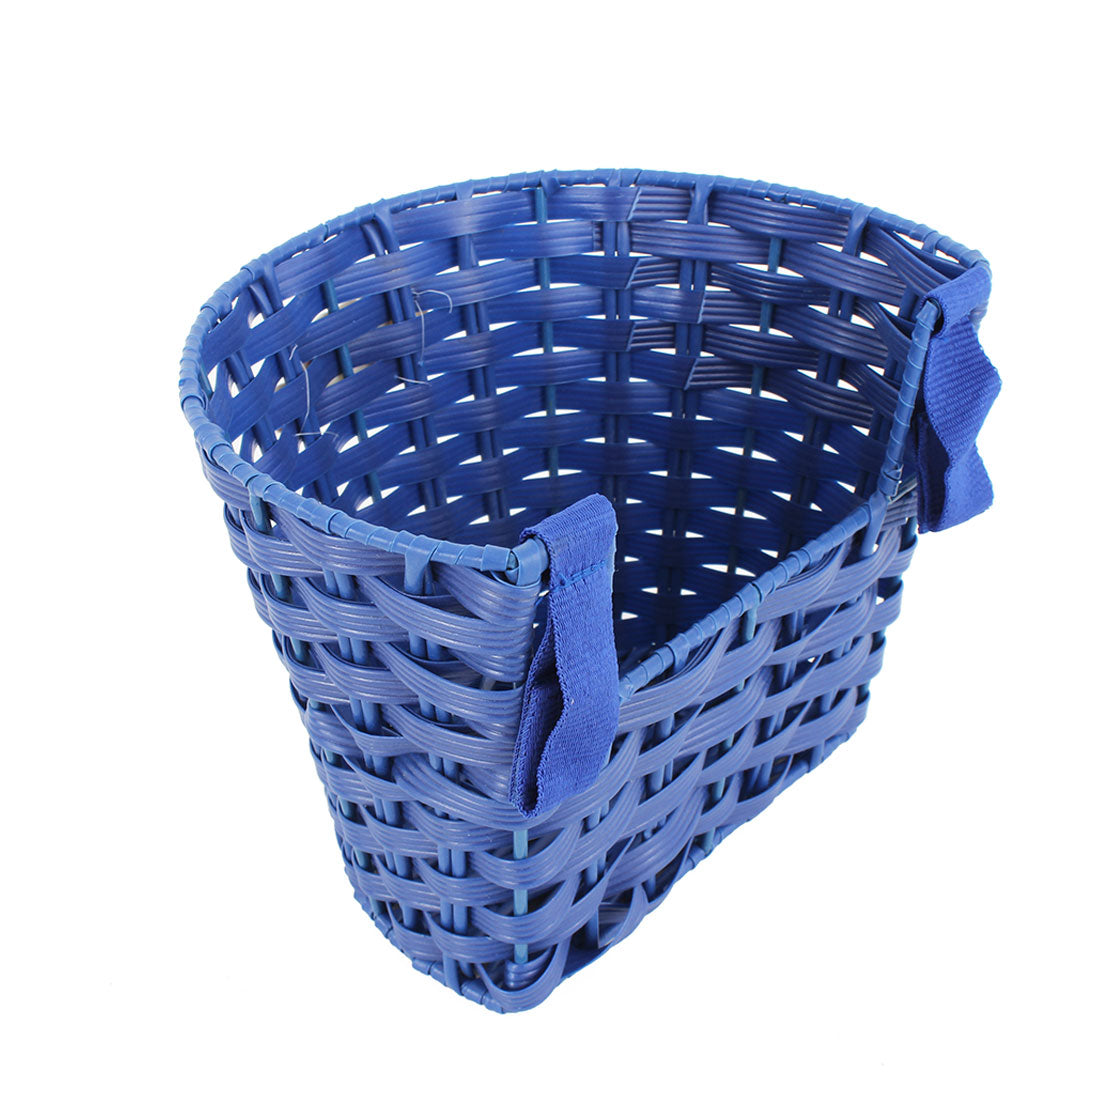 Micro Scooter Basket - Blue Scooter Accessories